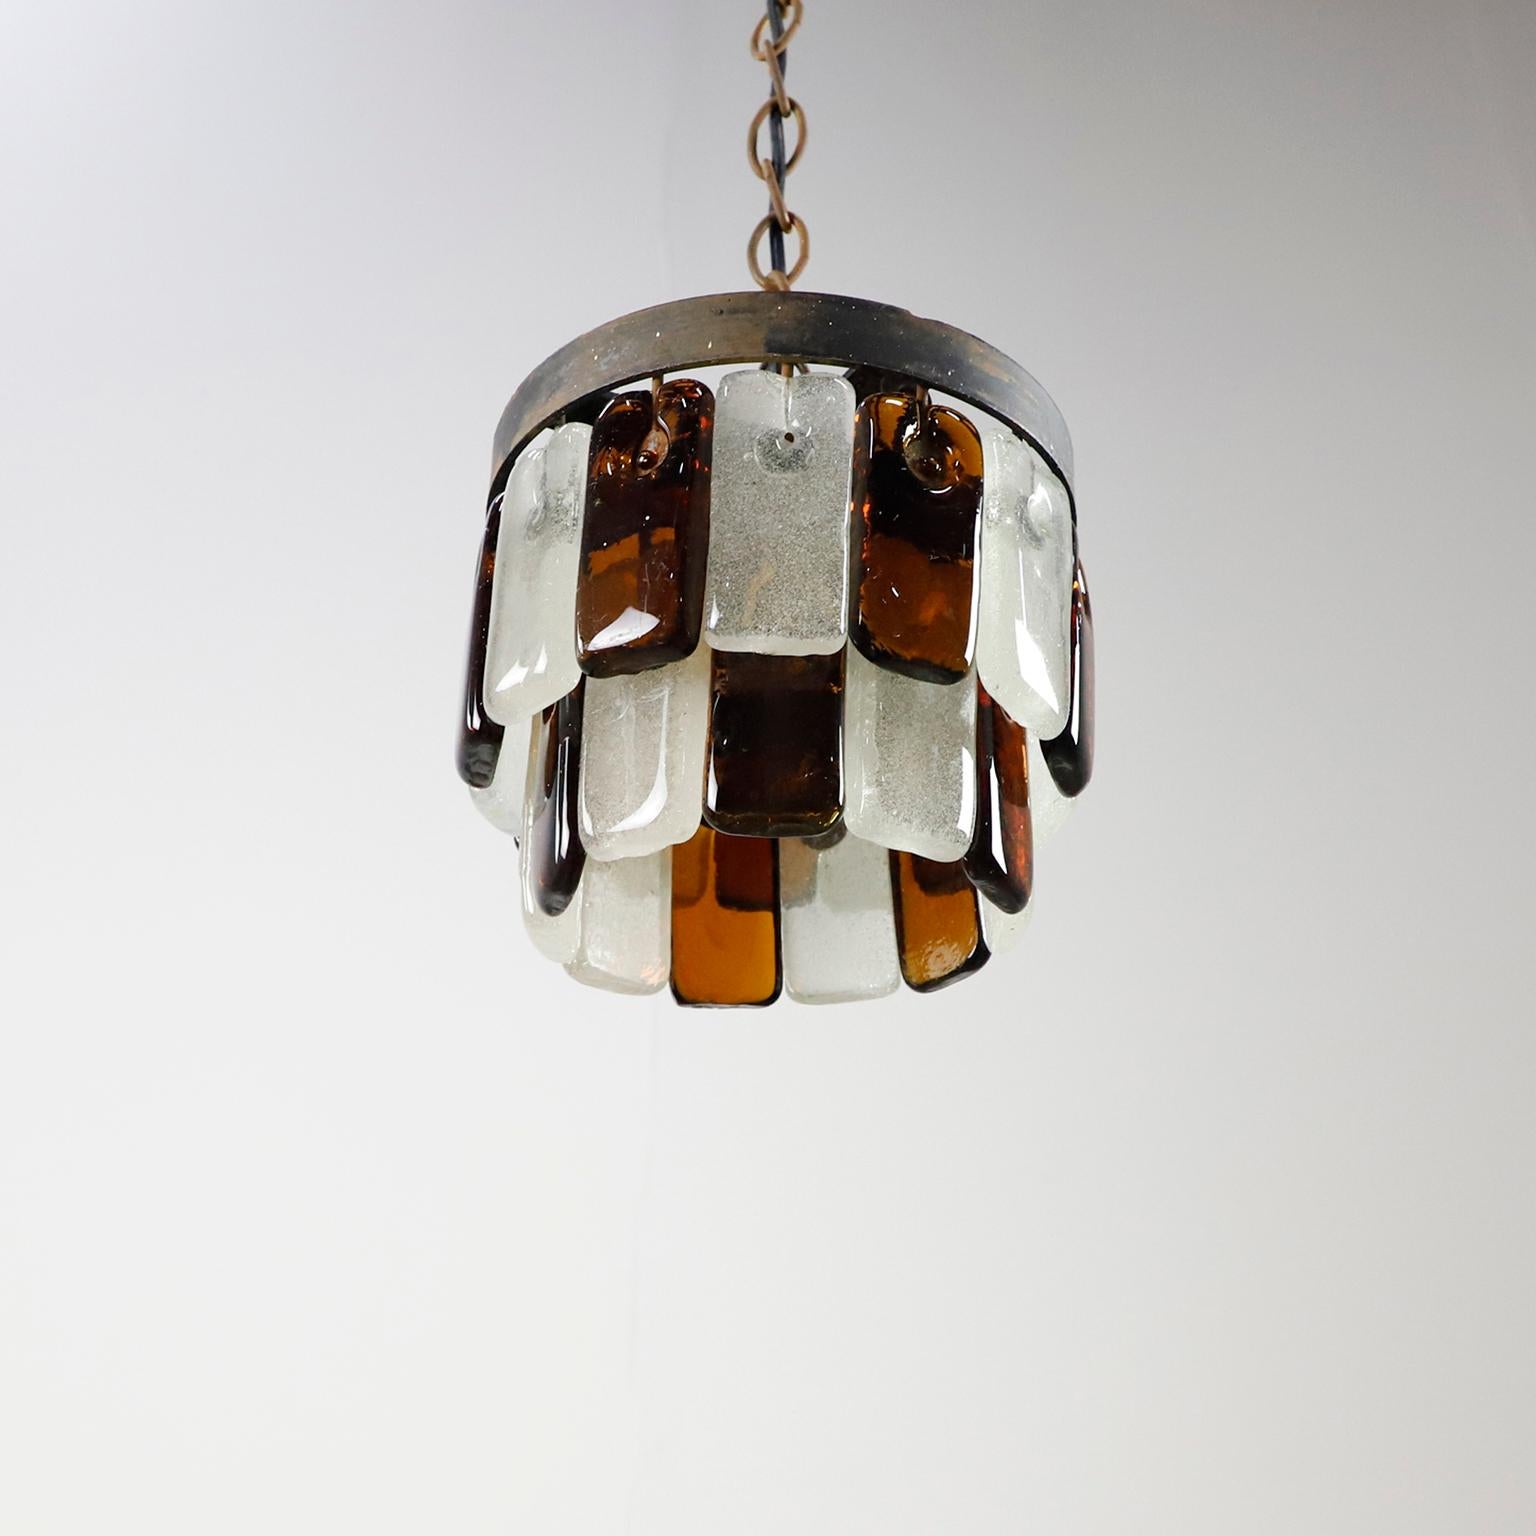 We offer this Feders hand blown glass chandelier designed by Felipe Delfinger, Feders, Cuernavaca, Mexico. Using recycled glass, circa 1970. 


